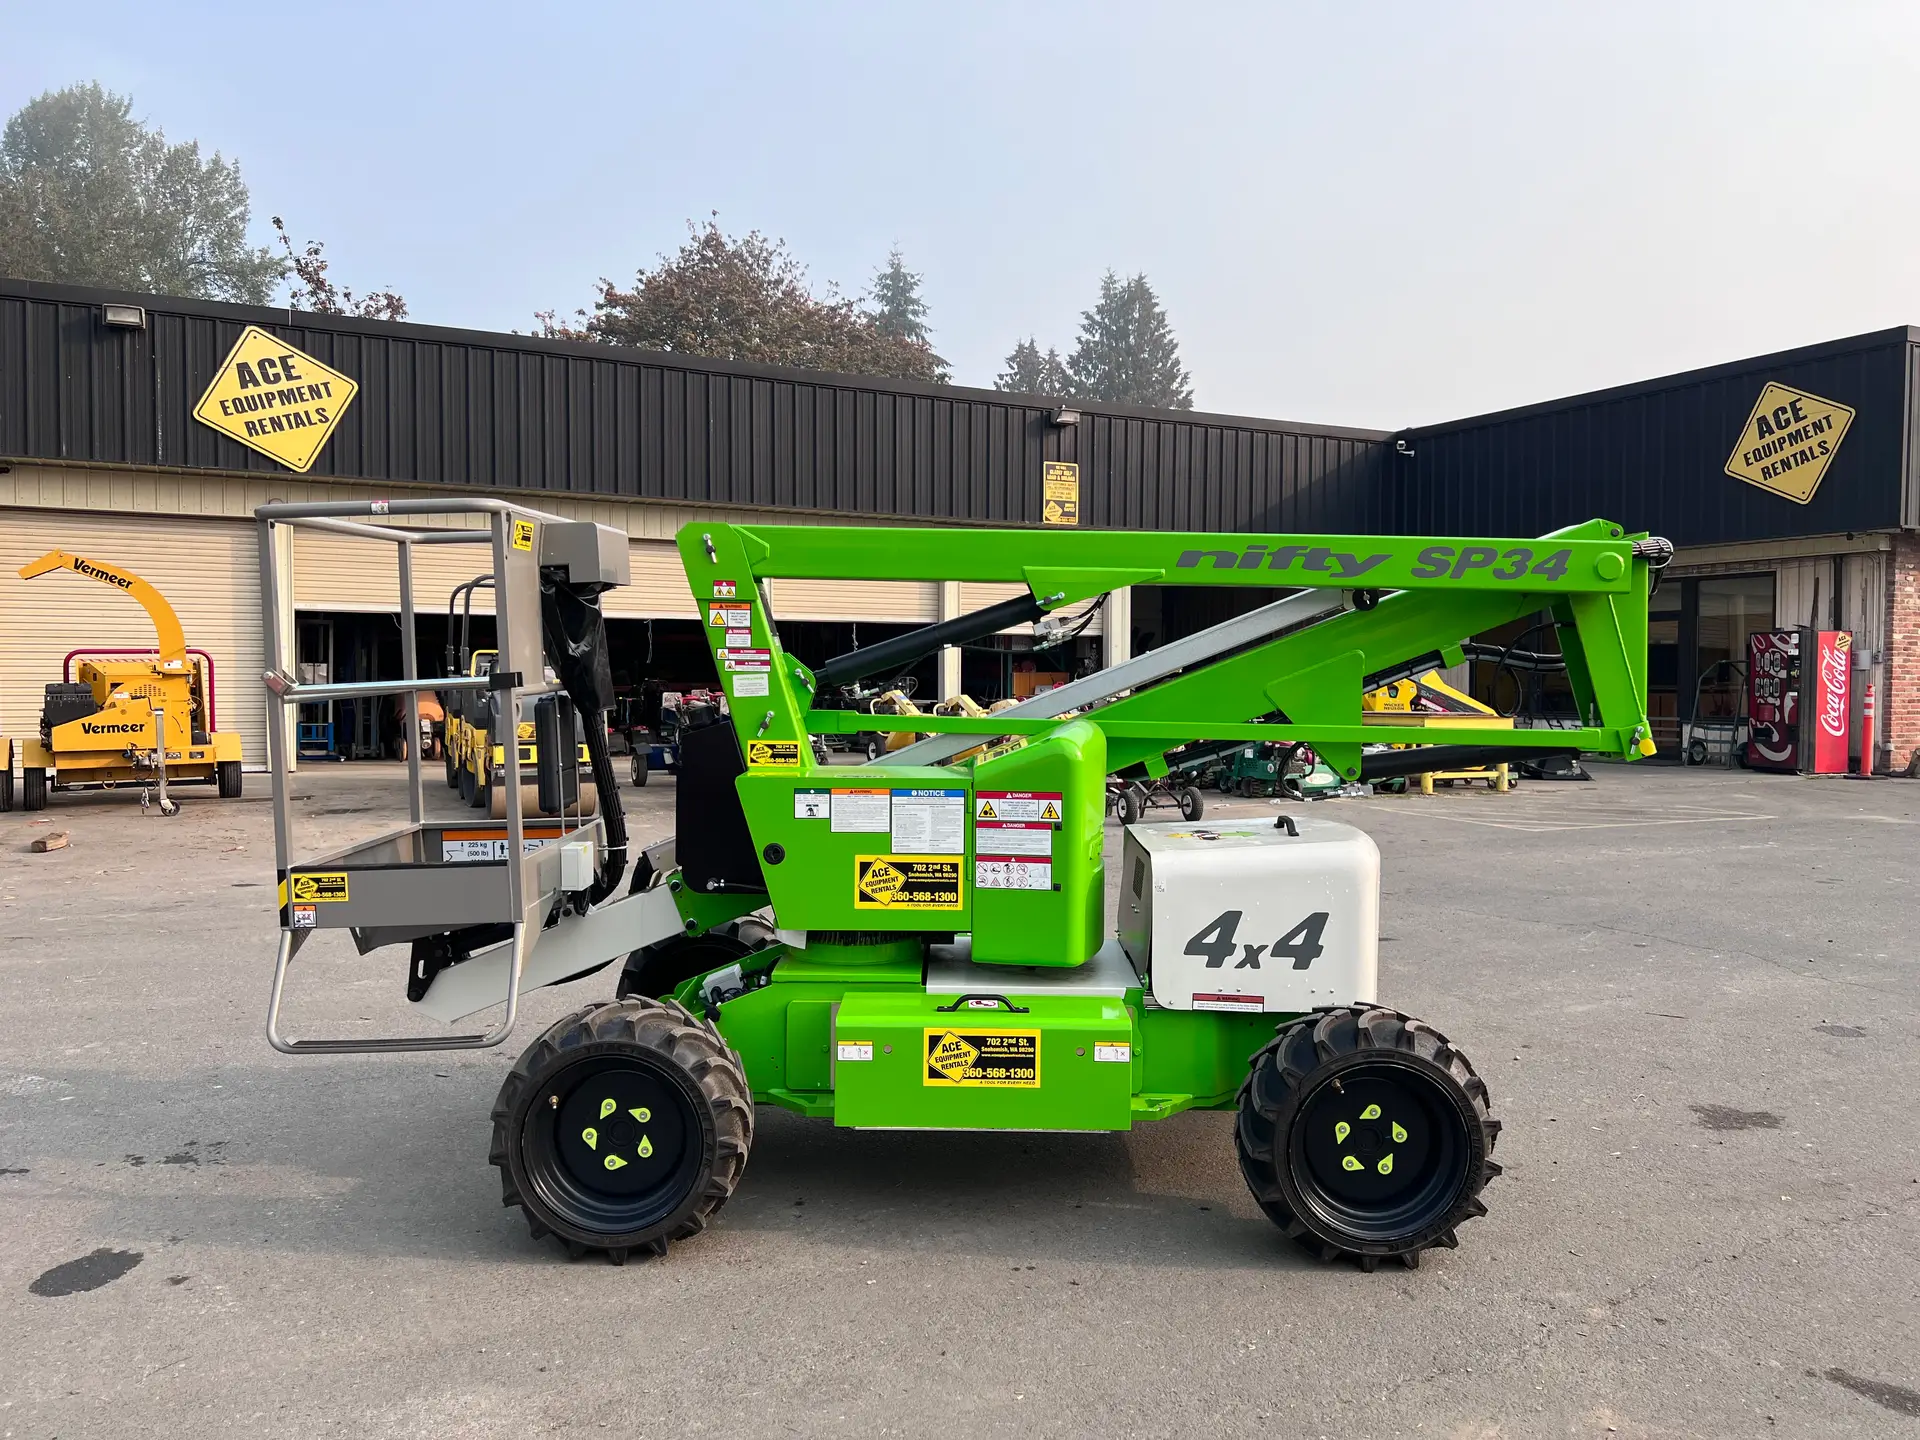 boom lift rental from ace equipment rentals in snohomish, wa